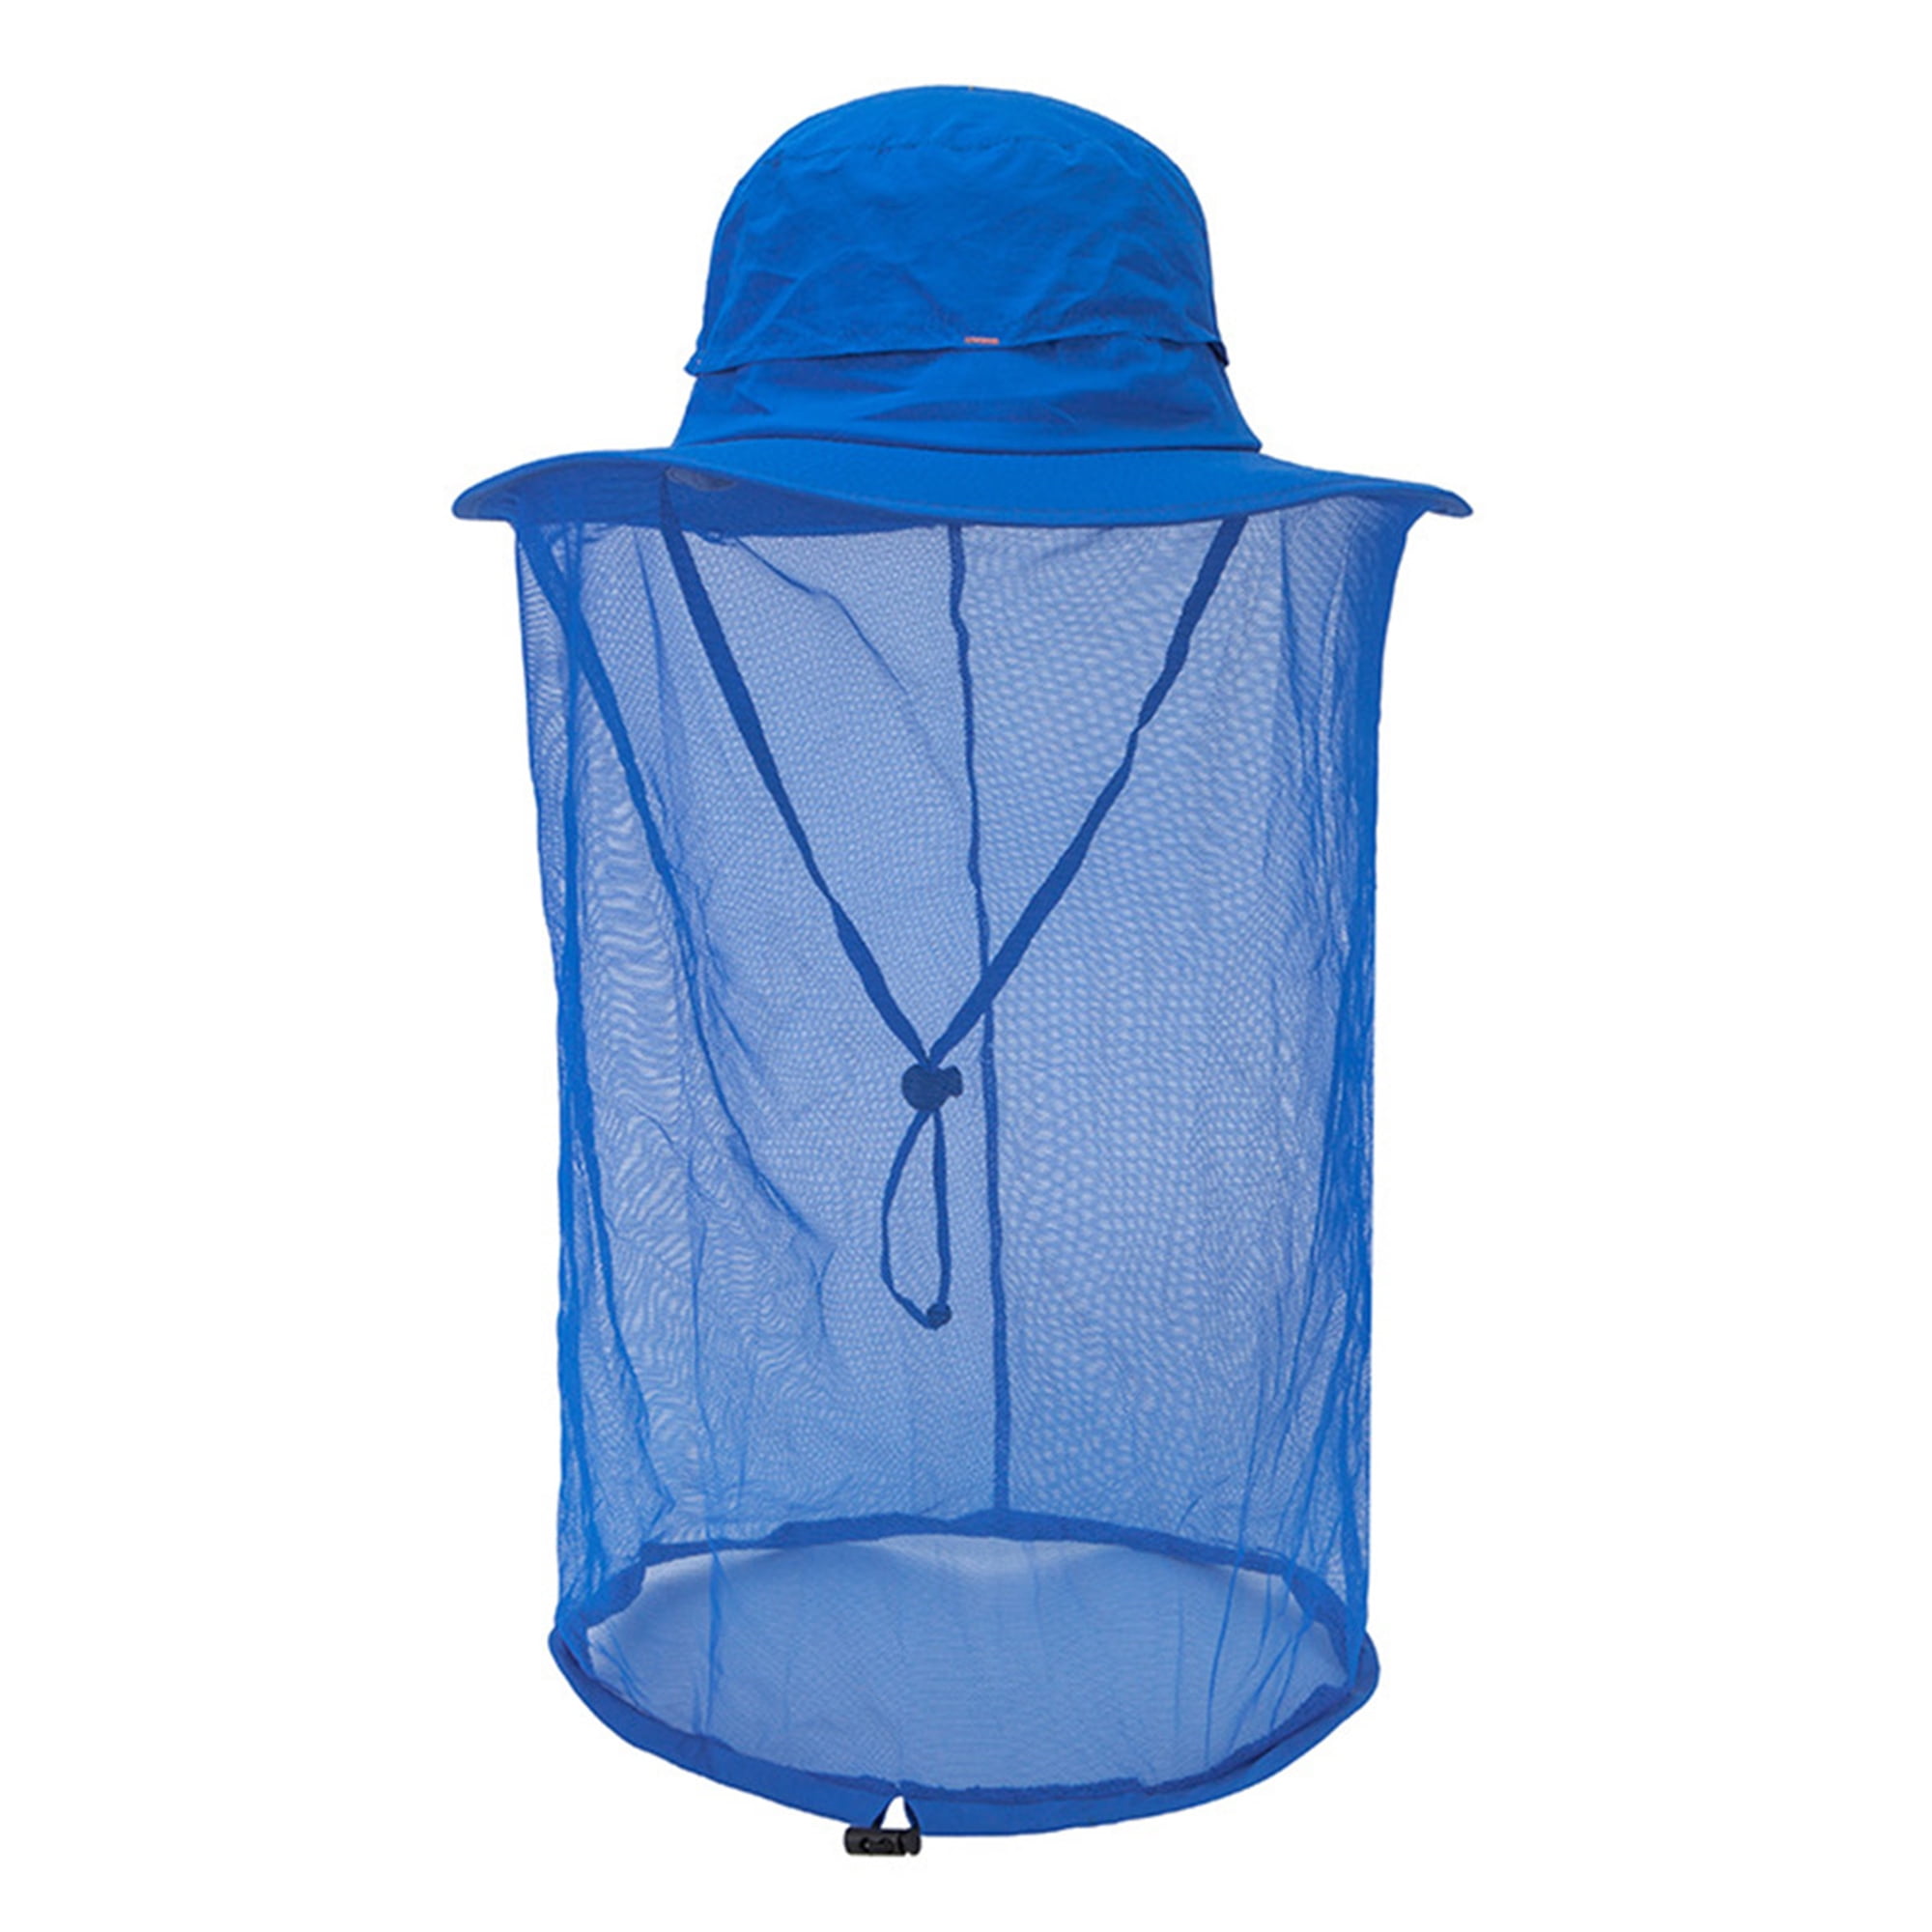 Bmnmsl UV Protection Fishman Hat With Insect Repellent Mesh Cover